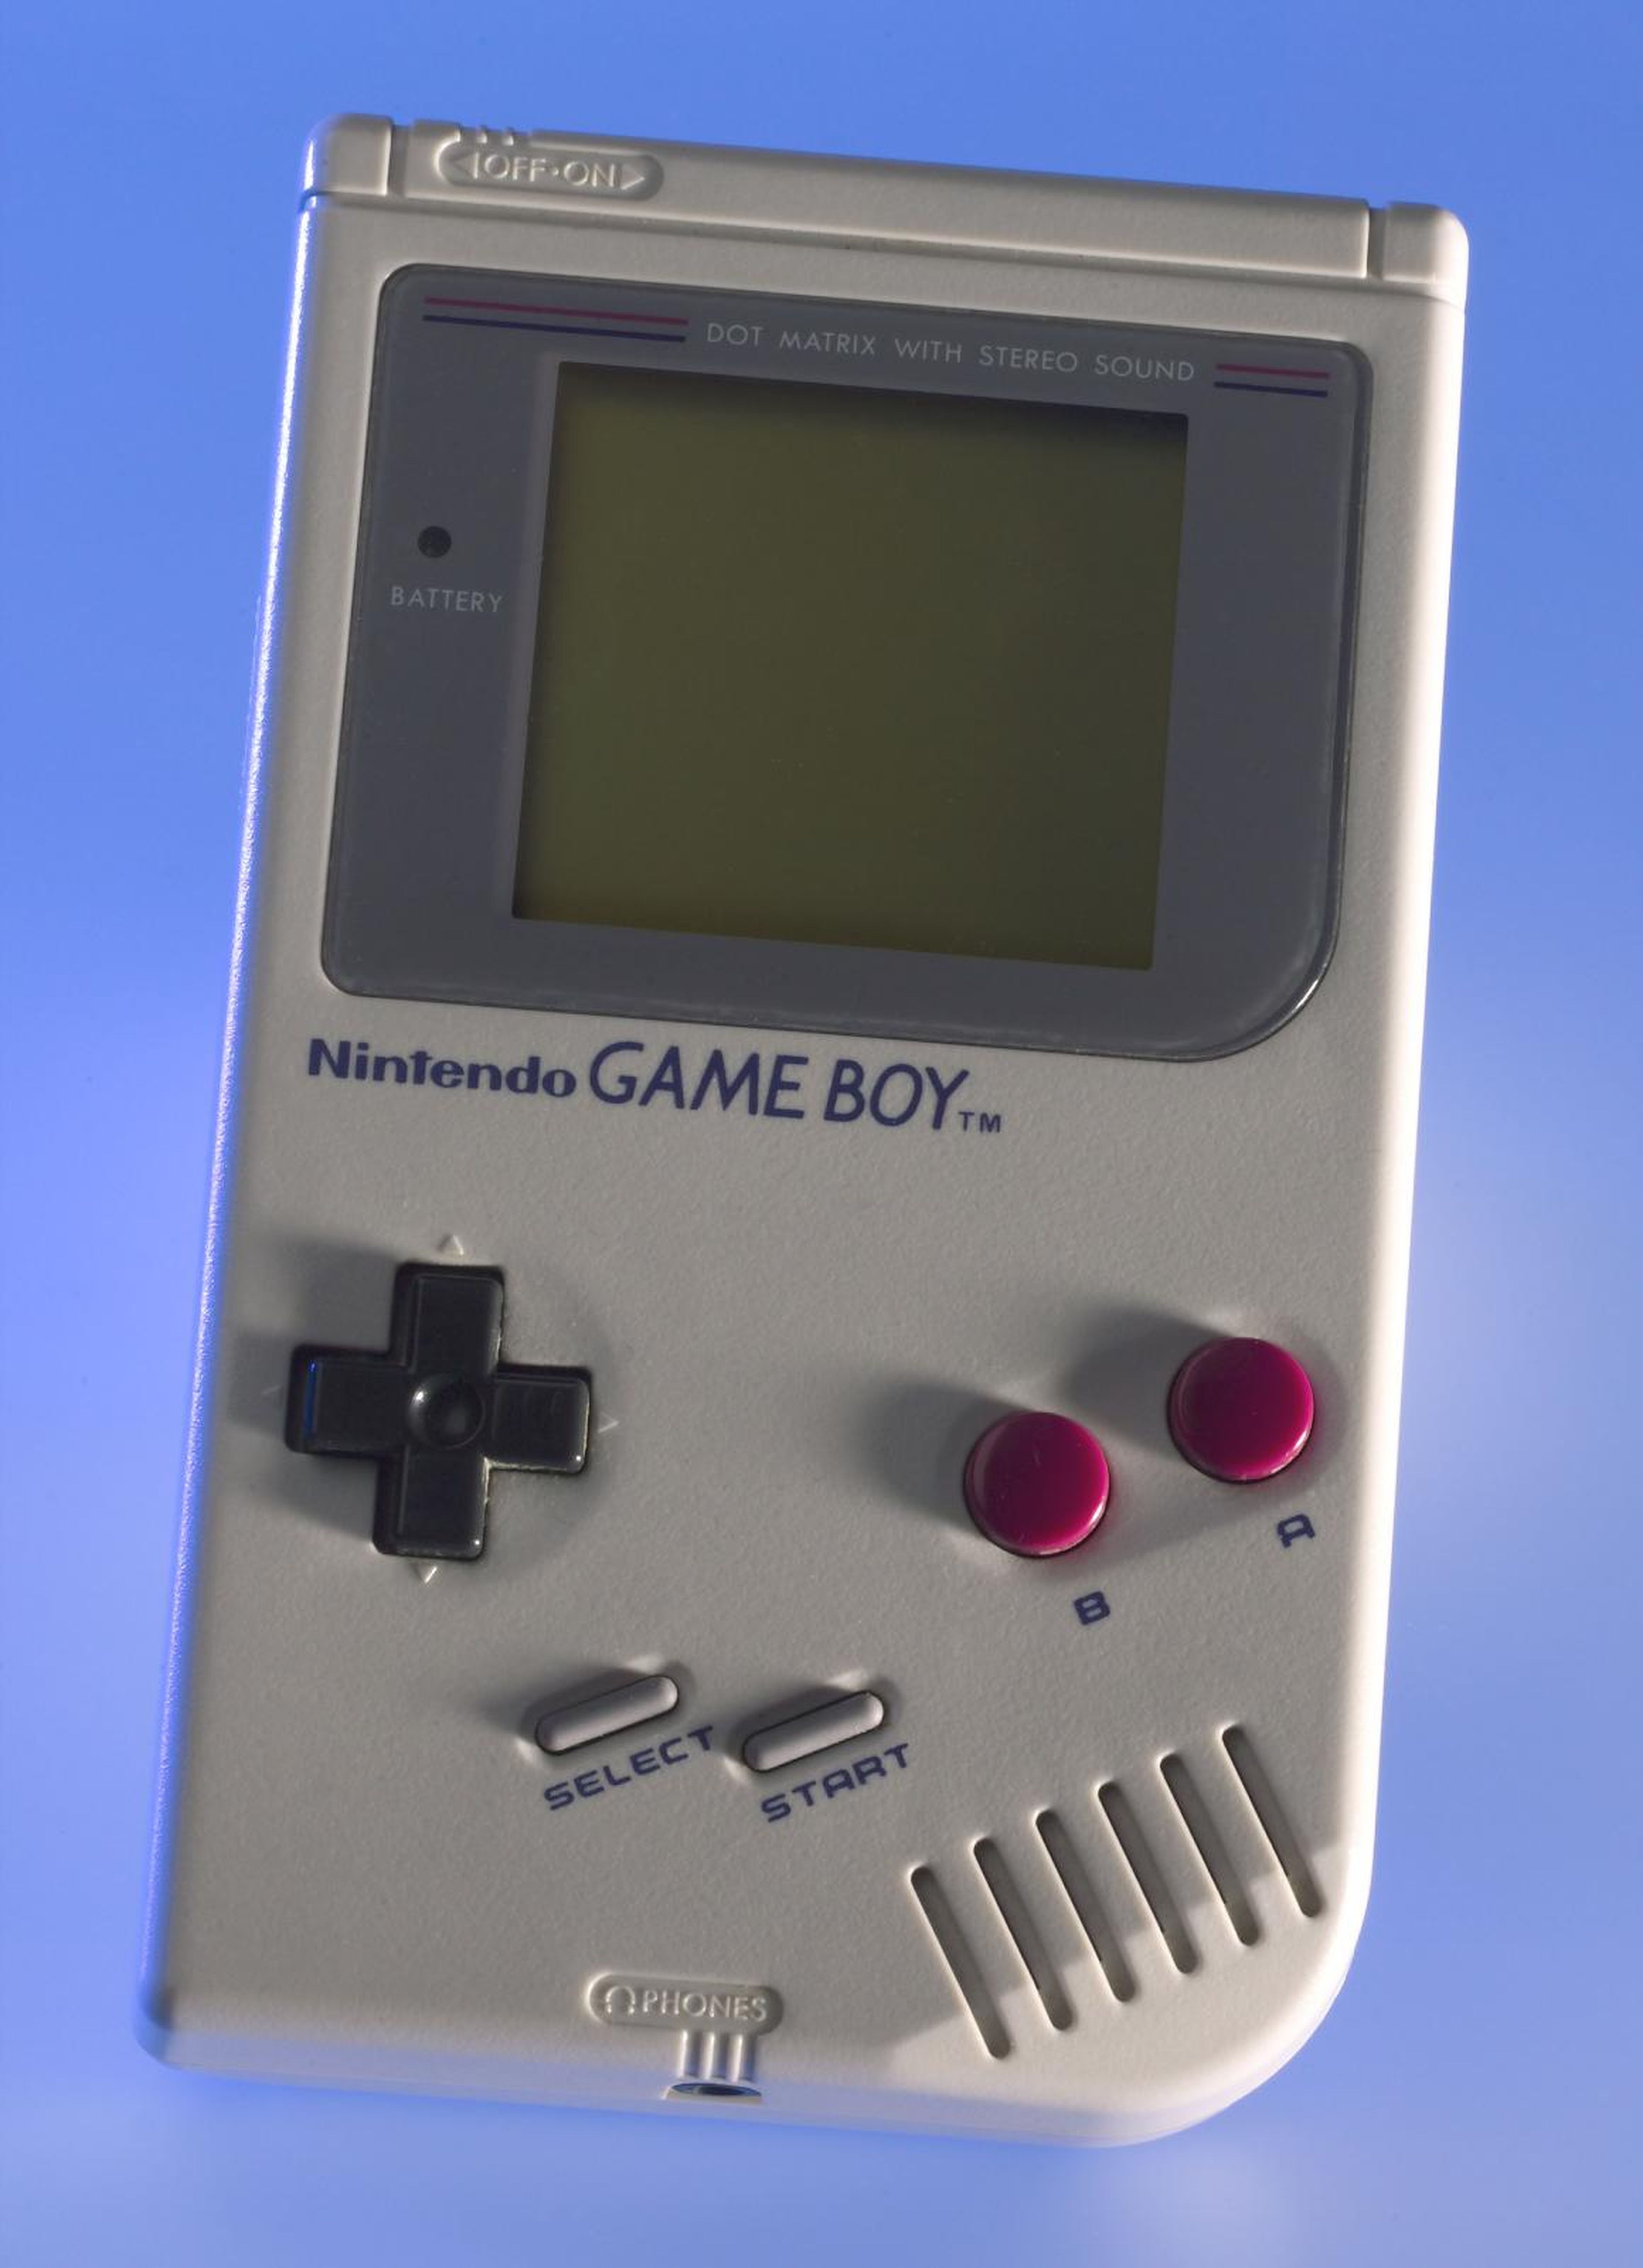 Nintendo's GameBoy came out in 1989 and effectively made gaming mainstream.